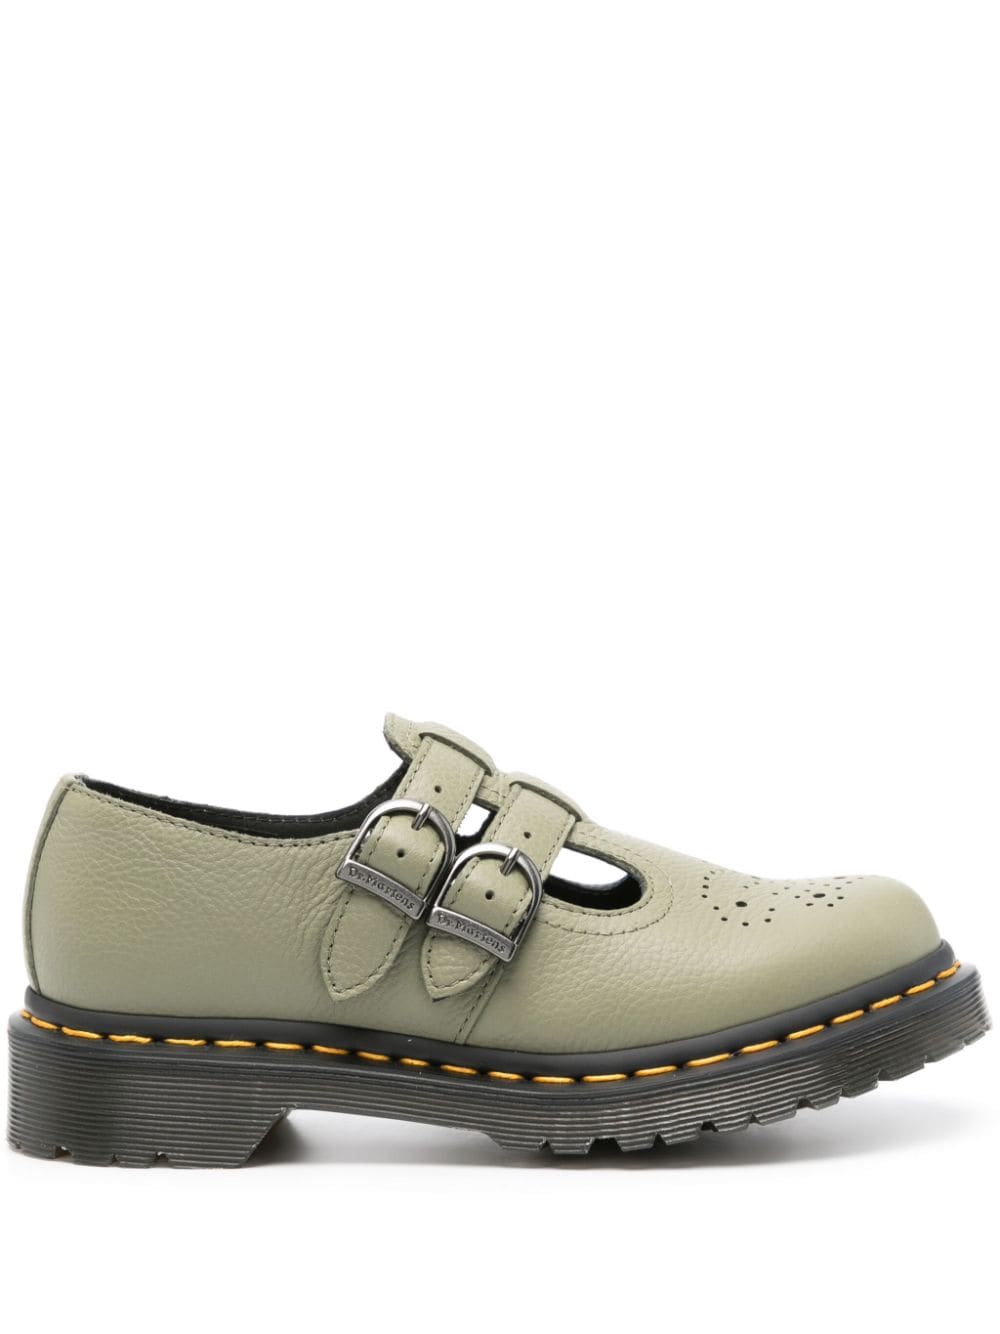 Dr. Martens DR. MARTENS- 8065 Mary Jane Leather Shoes